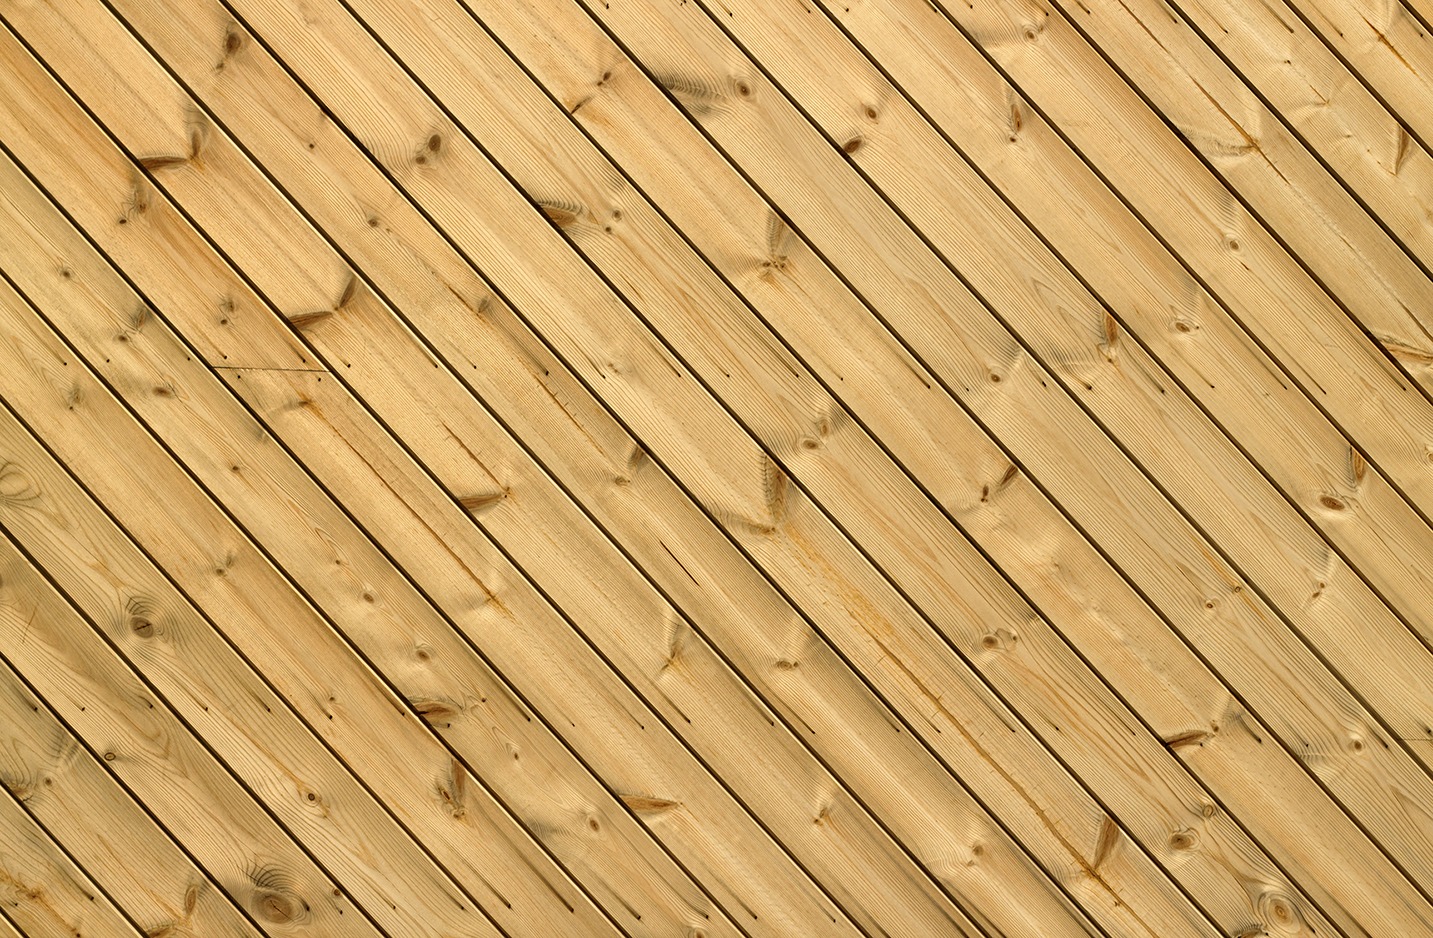 Wooden decking planks close up.